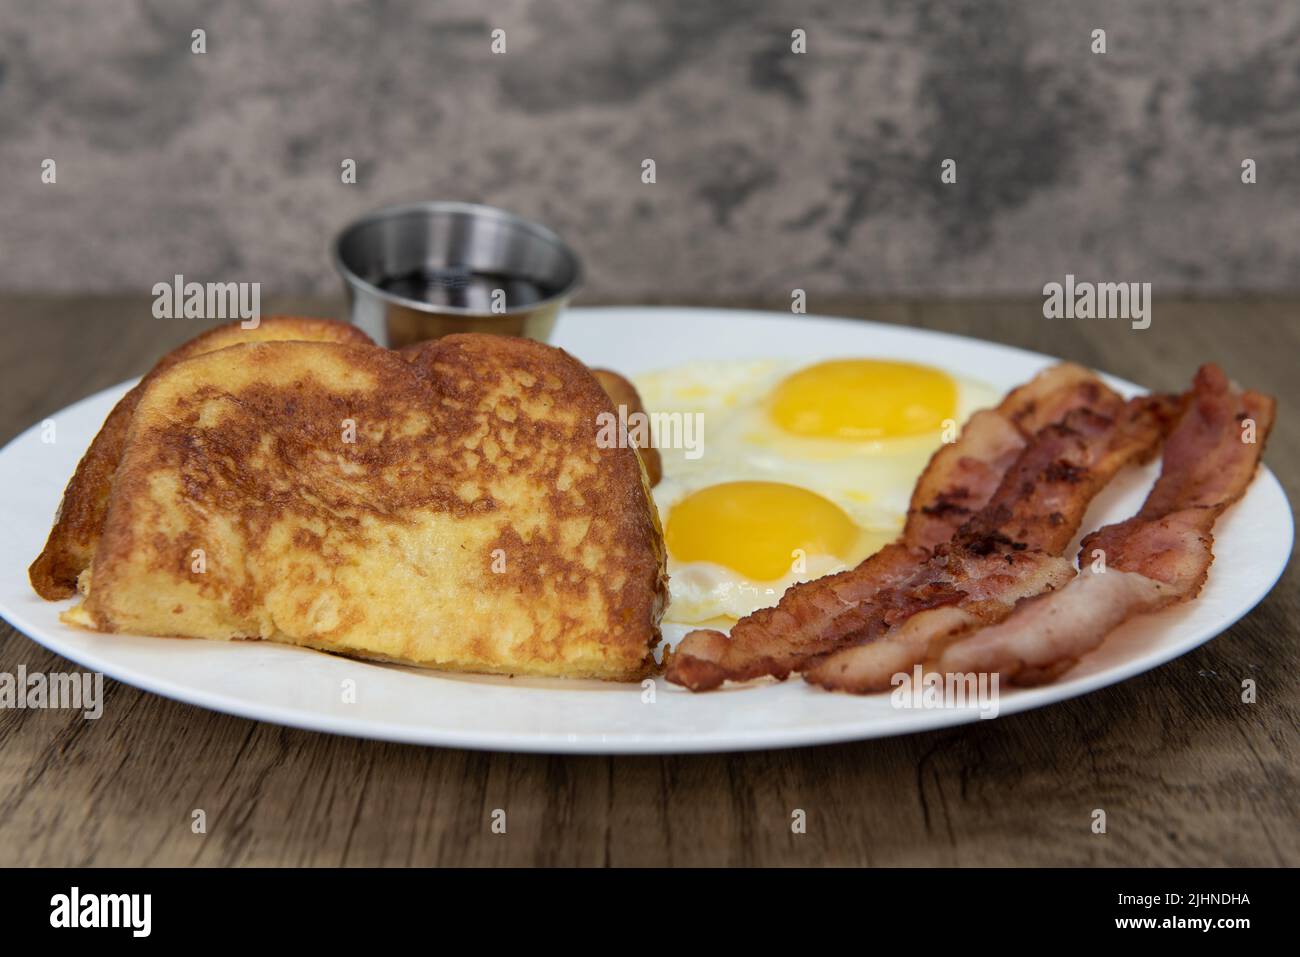 Traditional American breakfast consisting of french toast, fried eggs, and bacon will ensure that the belly will be full. Stock Photo